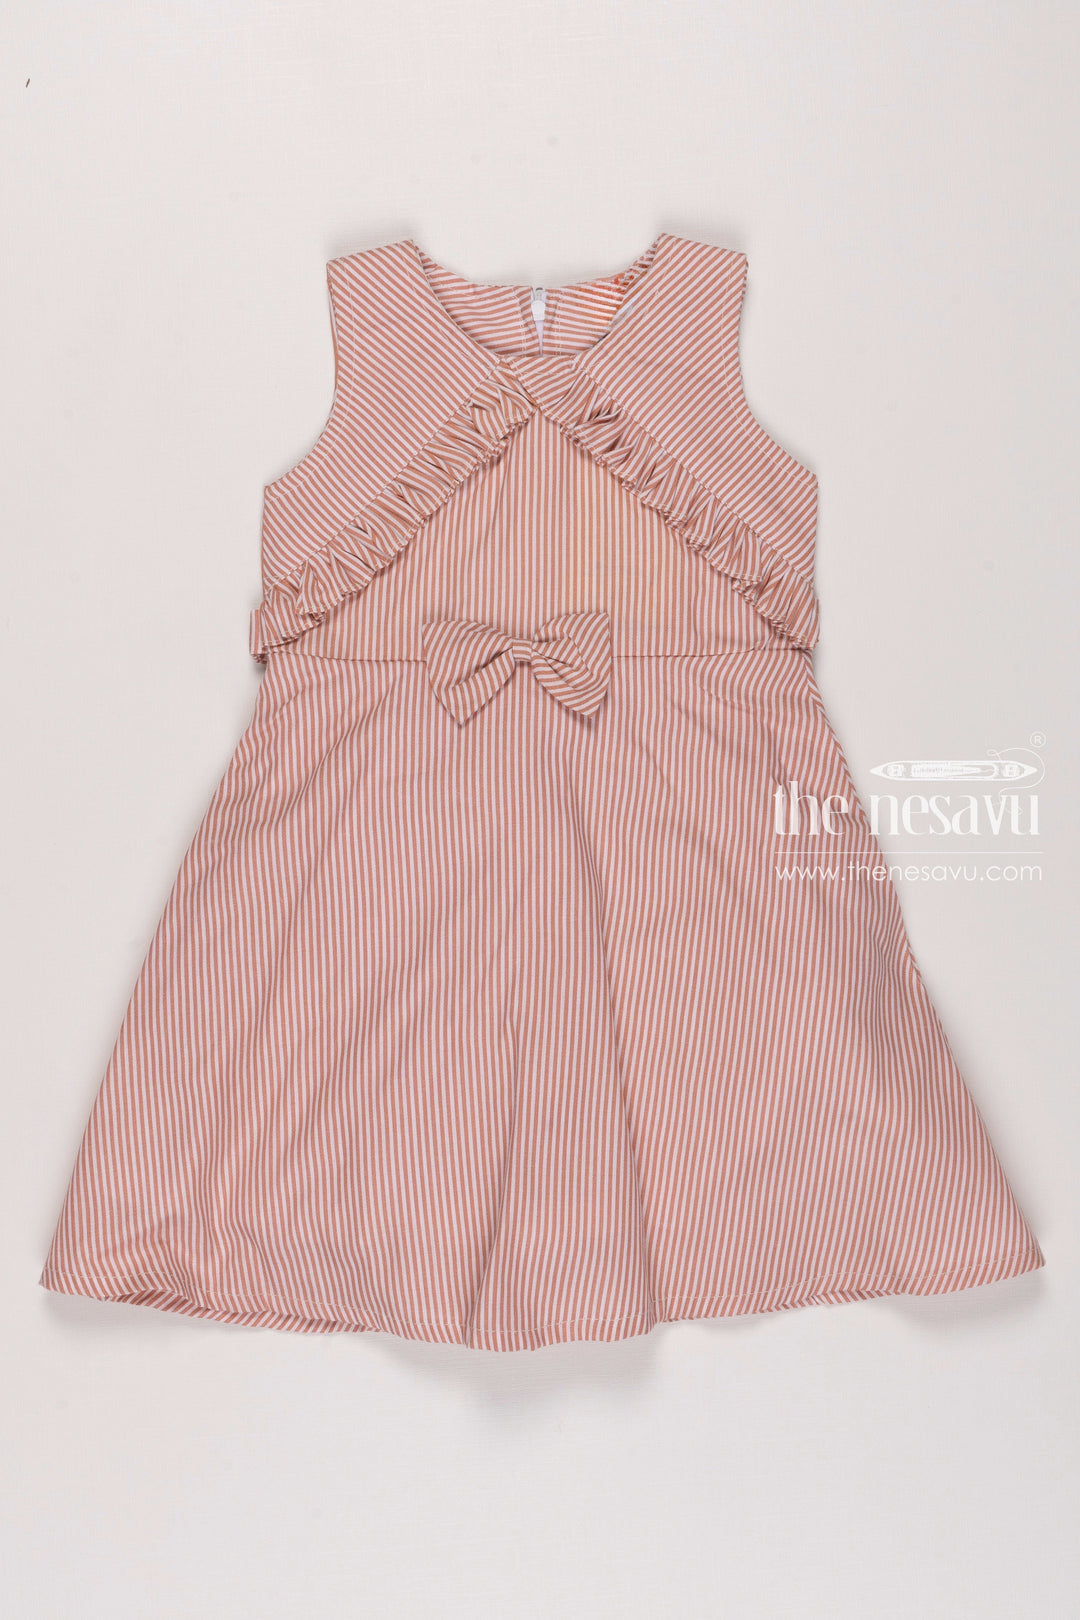 The Nesavu Girls Fancy Frock Classic Pink Striped Latest Cotton Frock Gown Design for Girls Nesavu 18 (2Y) / Pink / Cotton GFC1207B-18 Girls Sleeveless Pink Striped Dress | Lightweight Summer Frock | The Nesavu